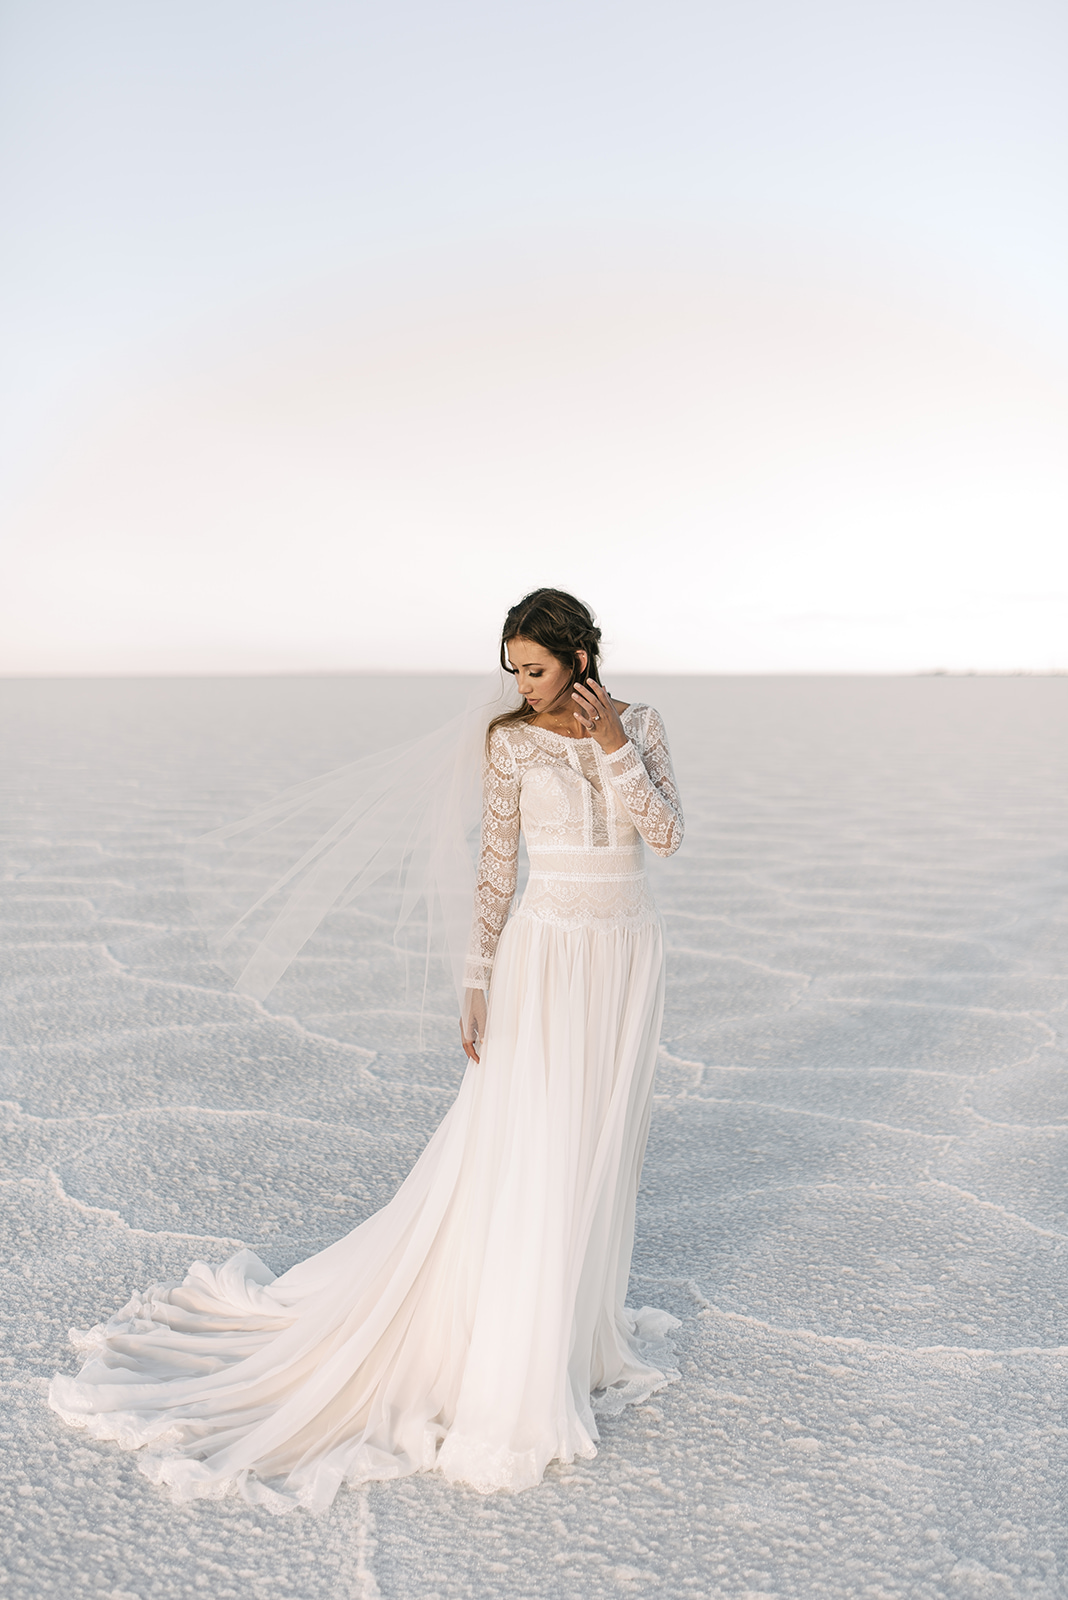 Real Bride at Salt Flats Wearing Lace Long Sleeve Winter Wedding Dress Deirdre by Maggie Sottero